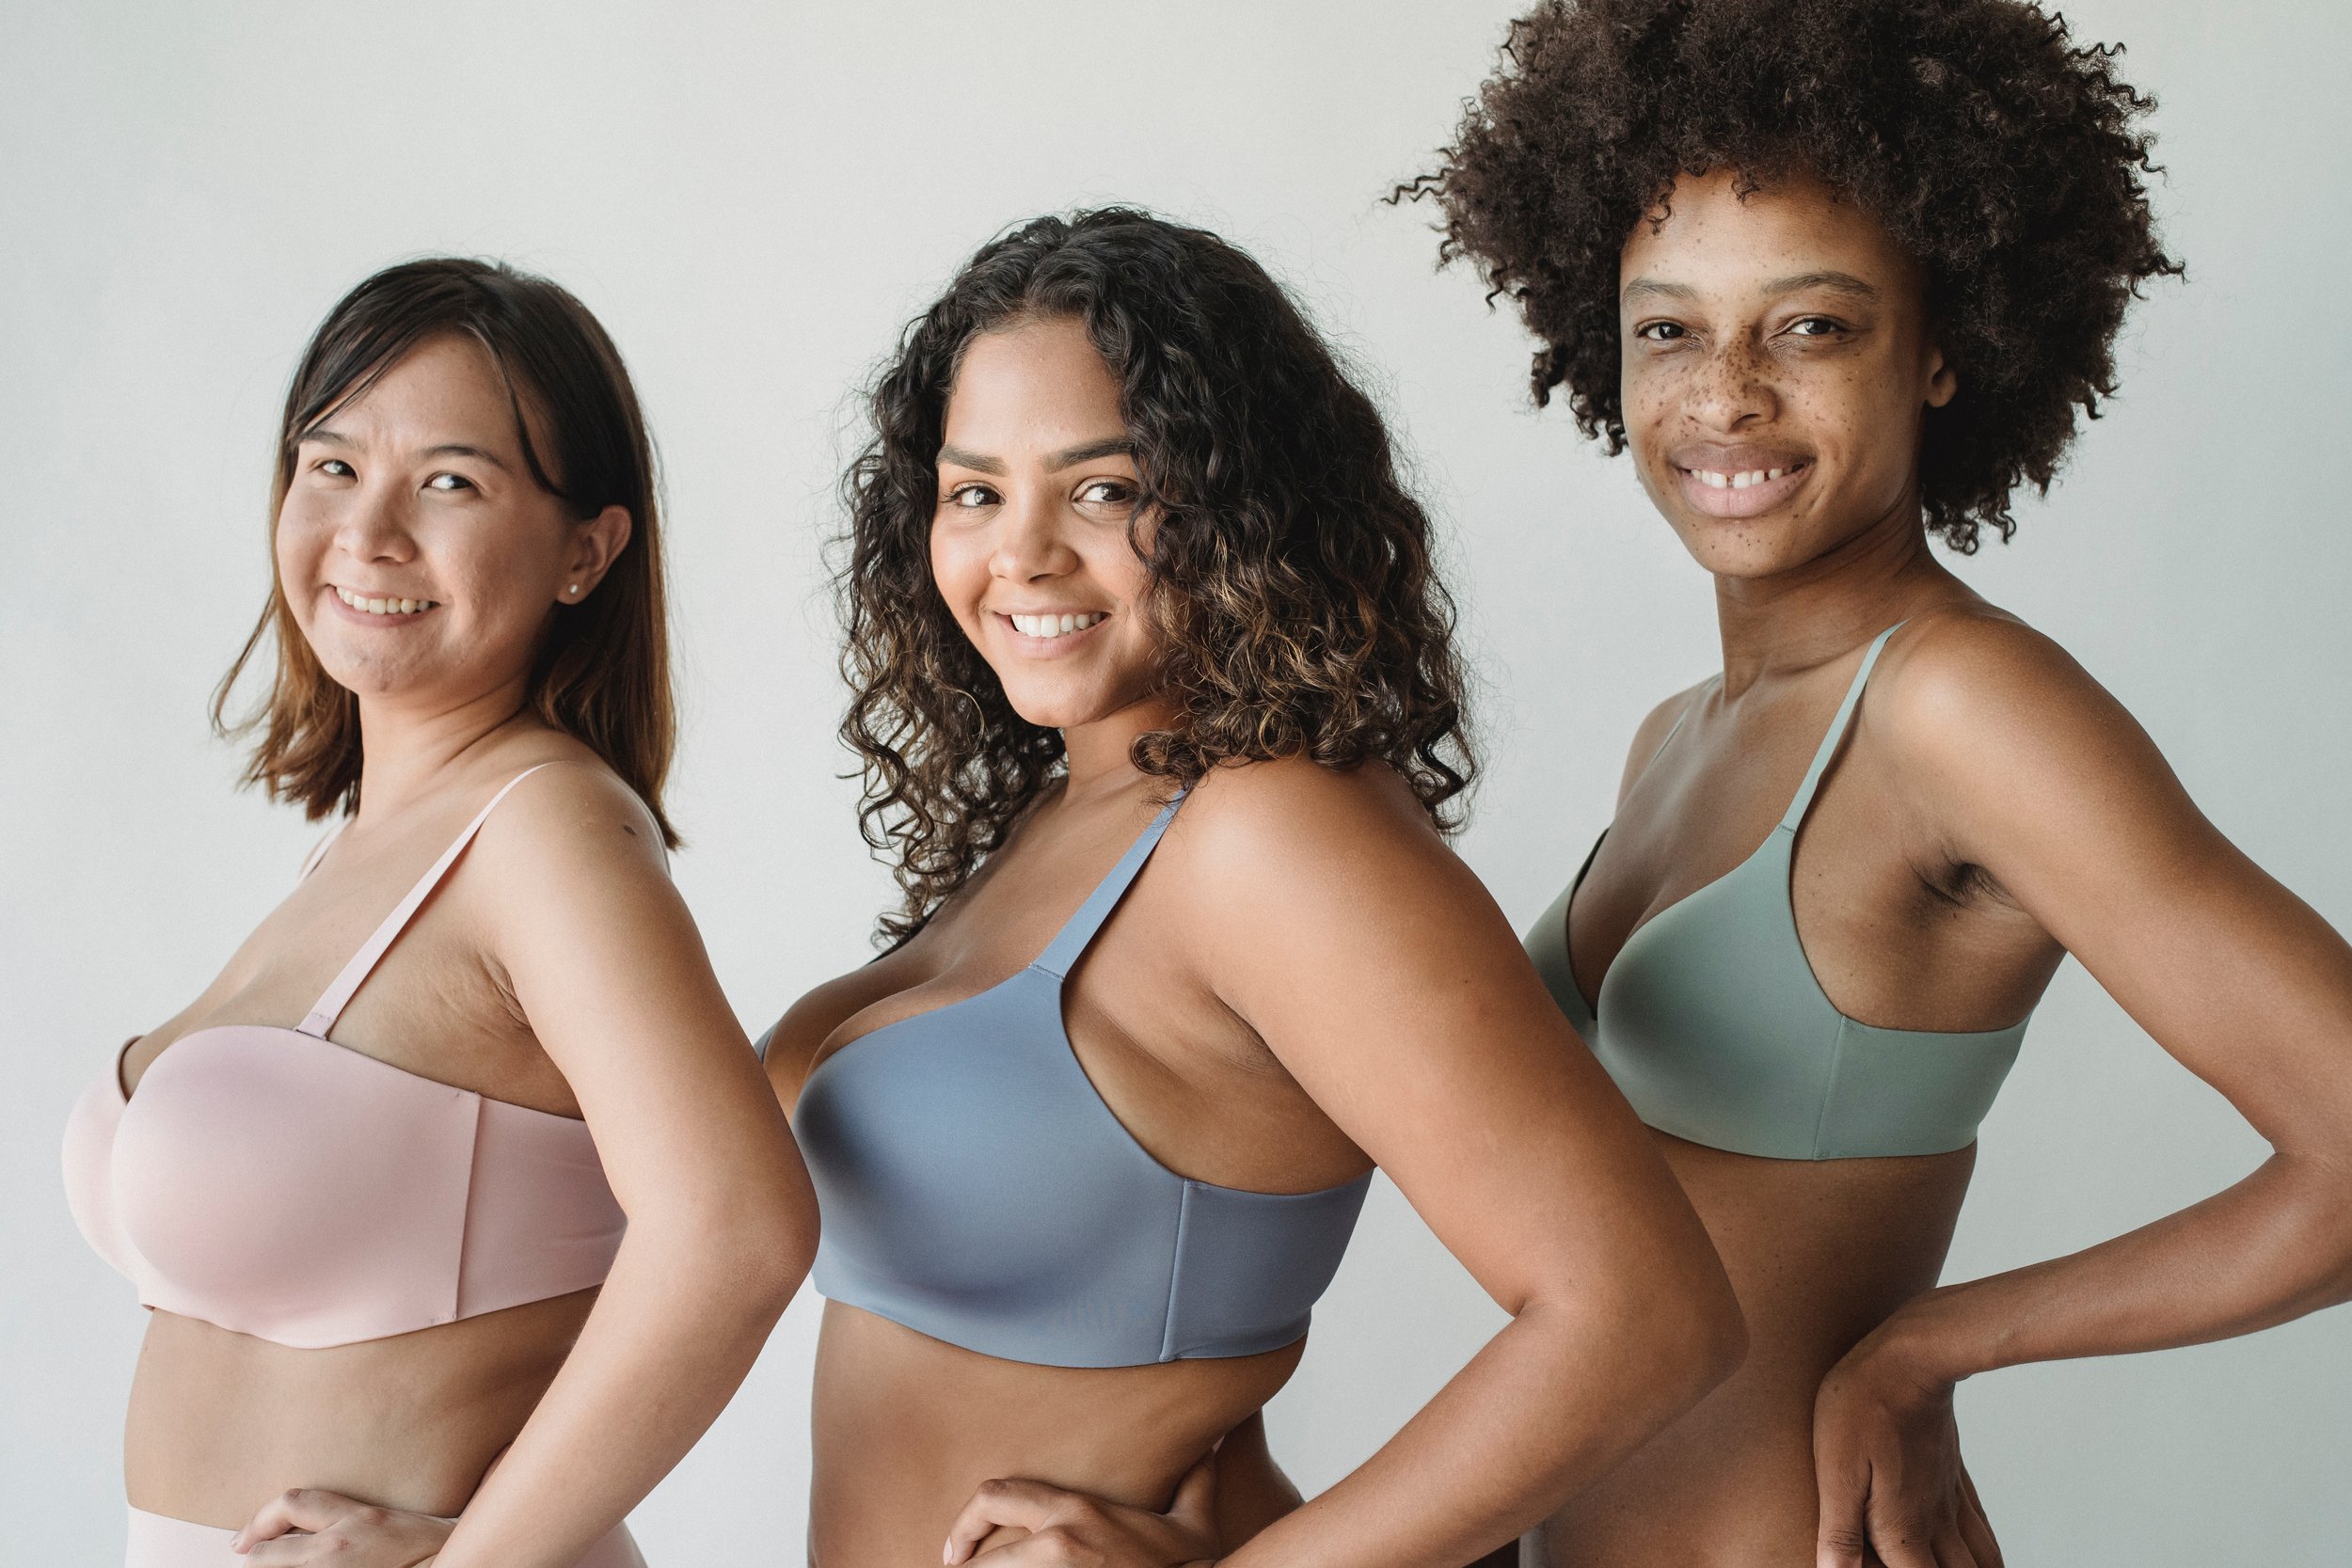 Case Study: Lingerie Manufacturer — Develop Products 20X Faster